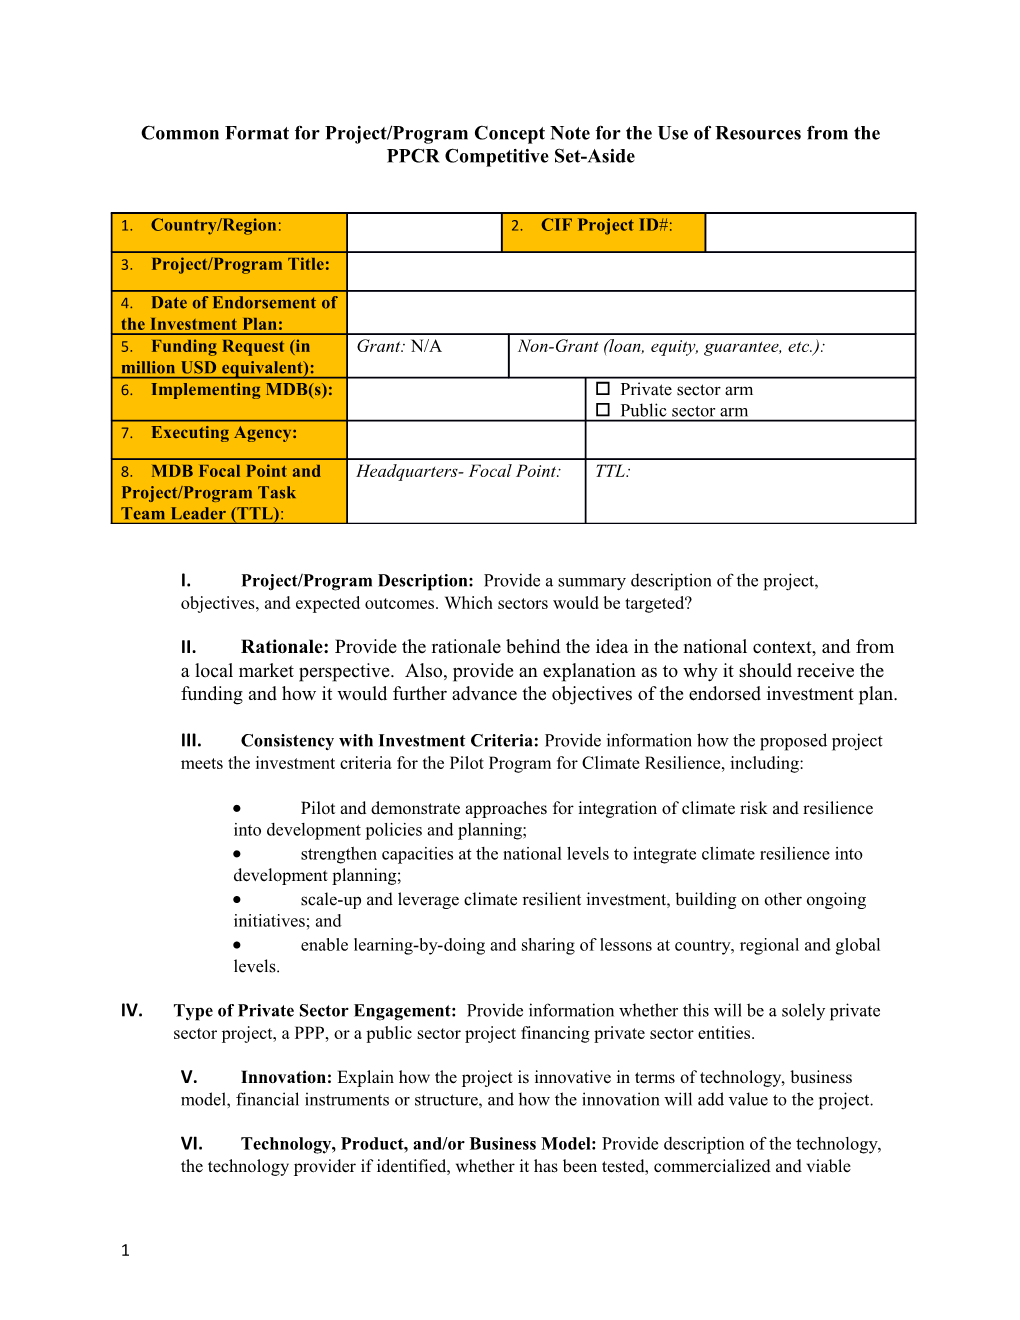 Common Format for Project/Program Concept Note for the Use of Resources from The